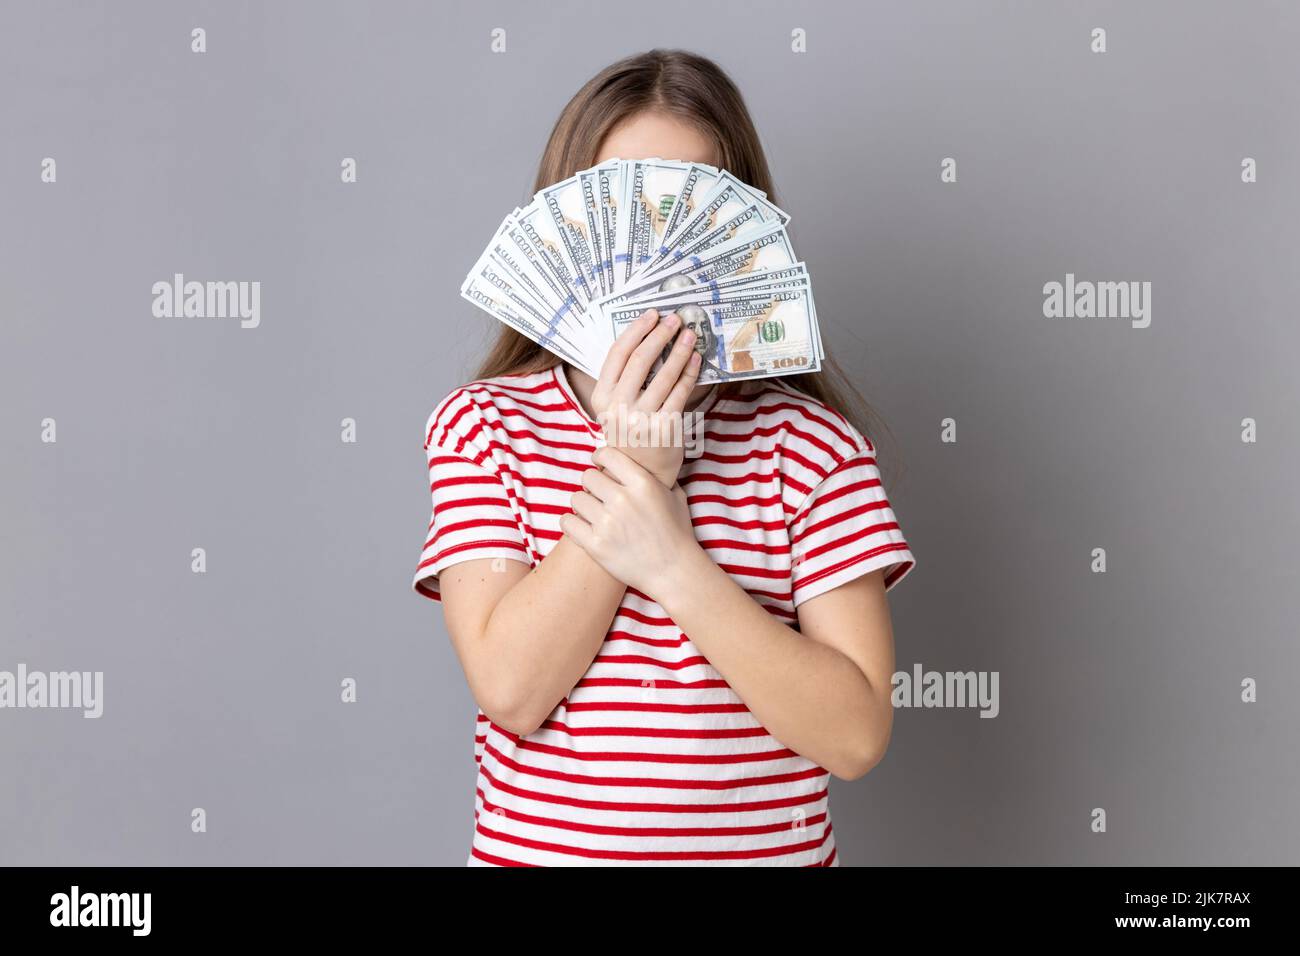 Portrait of unknown anonymous rich little girl wearing striped T-shirt hiding her face behind dollars banknotes, income of money. Indoor studio shot isolated on gray background. Stock Photo